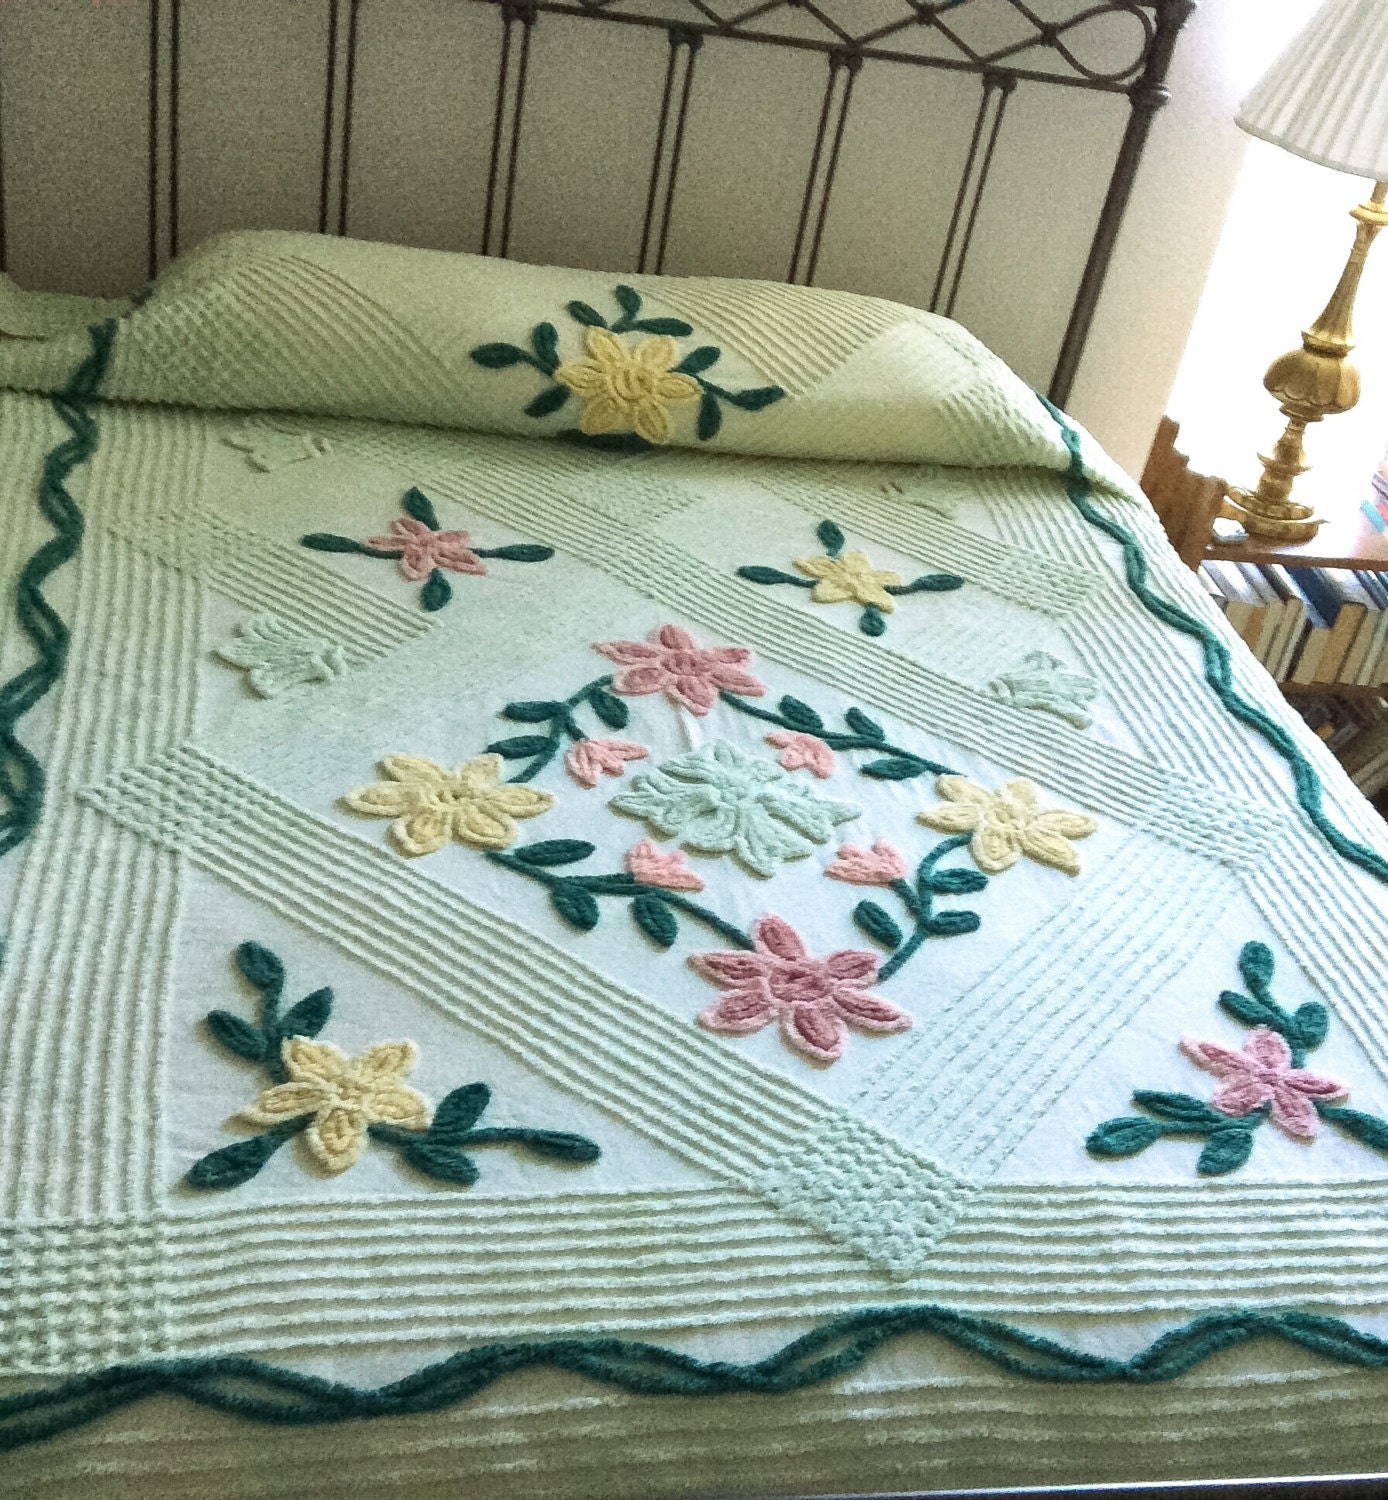 Vintage Chenille Bedspread With Flowers And Gold Border Vintage ...